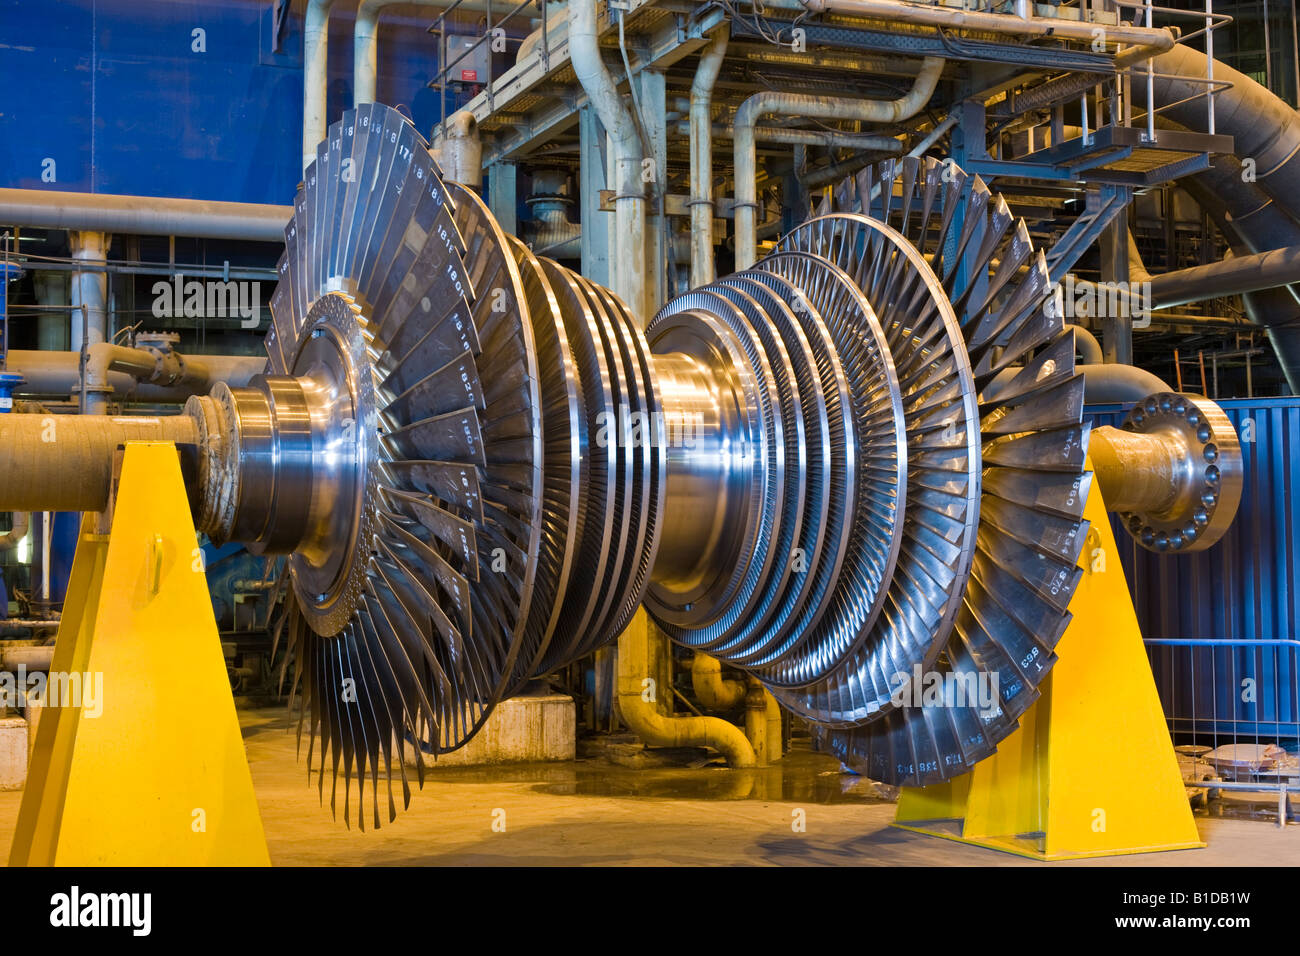 Siemens Power Generation High Resolution Stock Photography and Images -  Alamy